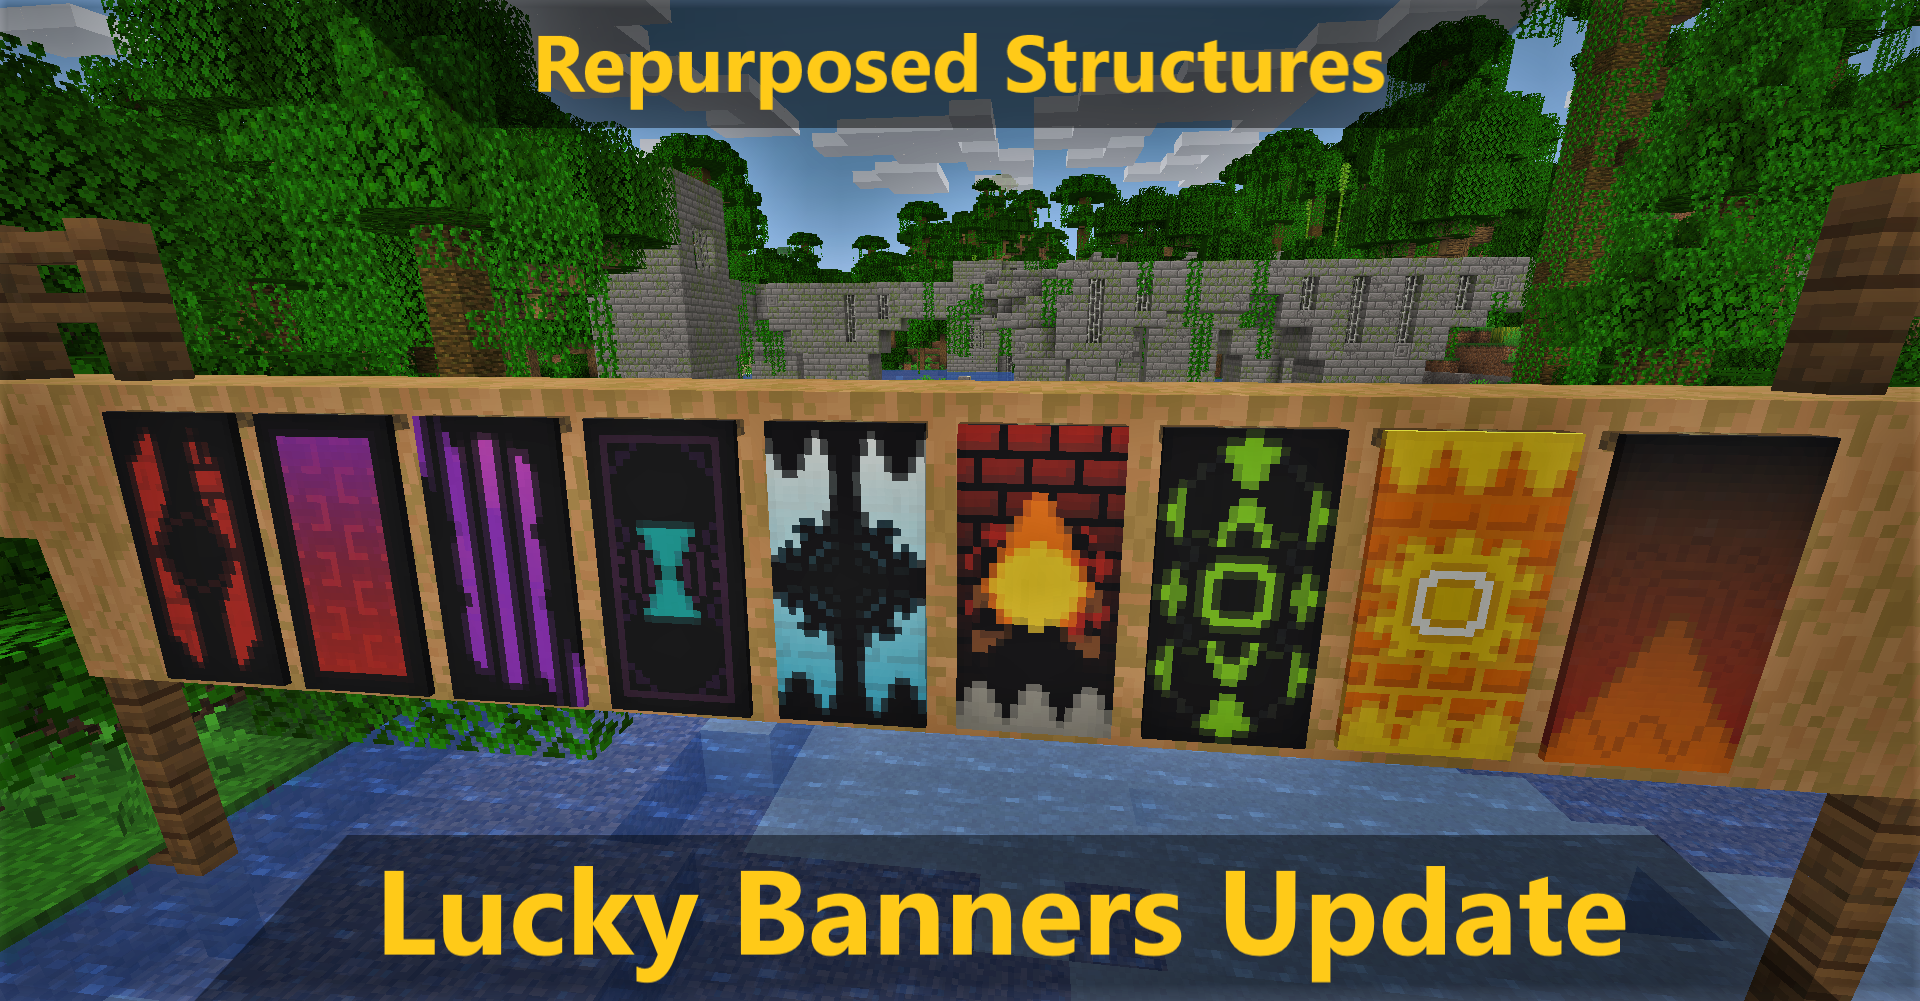 Banners added when you open chests with Luck status on!